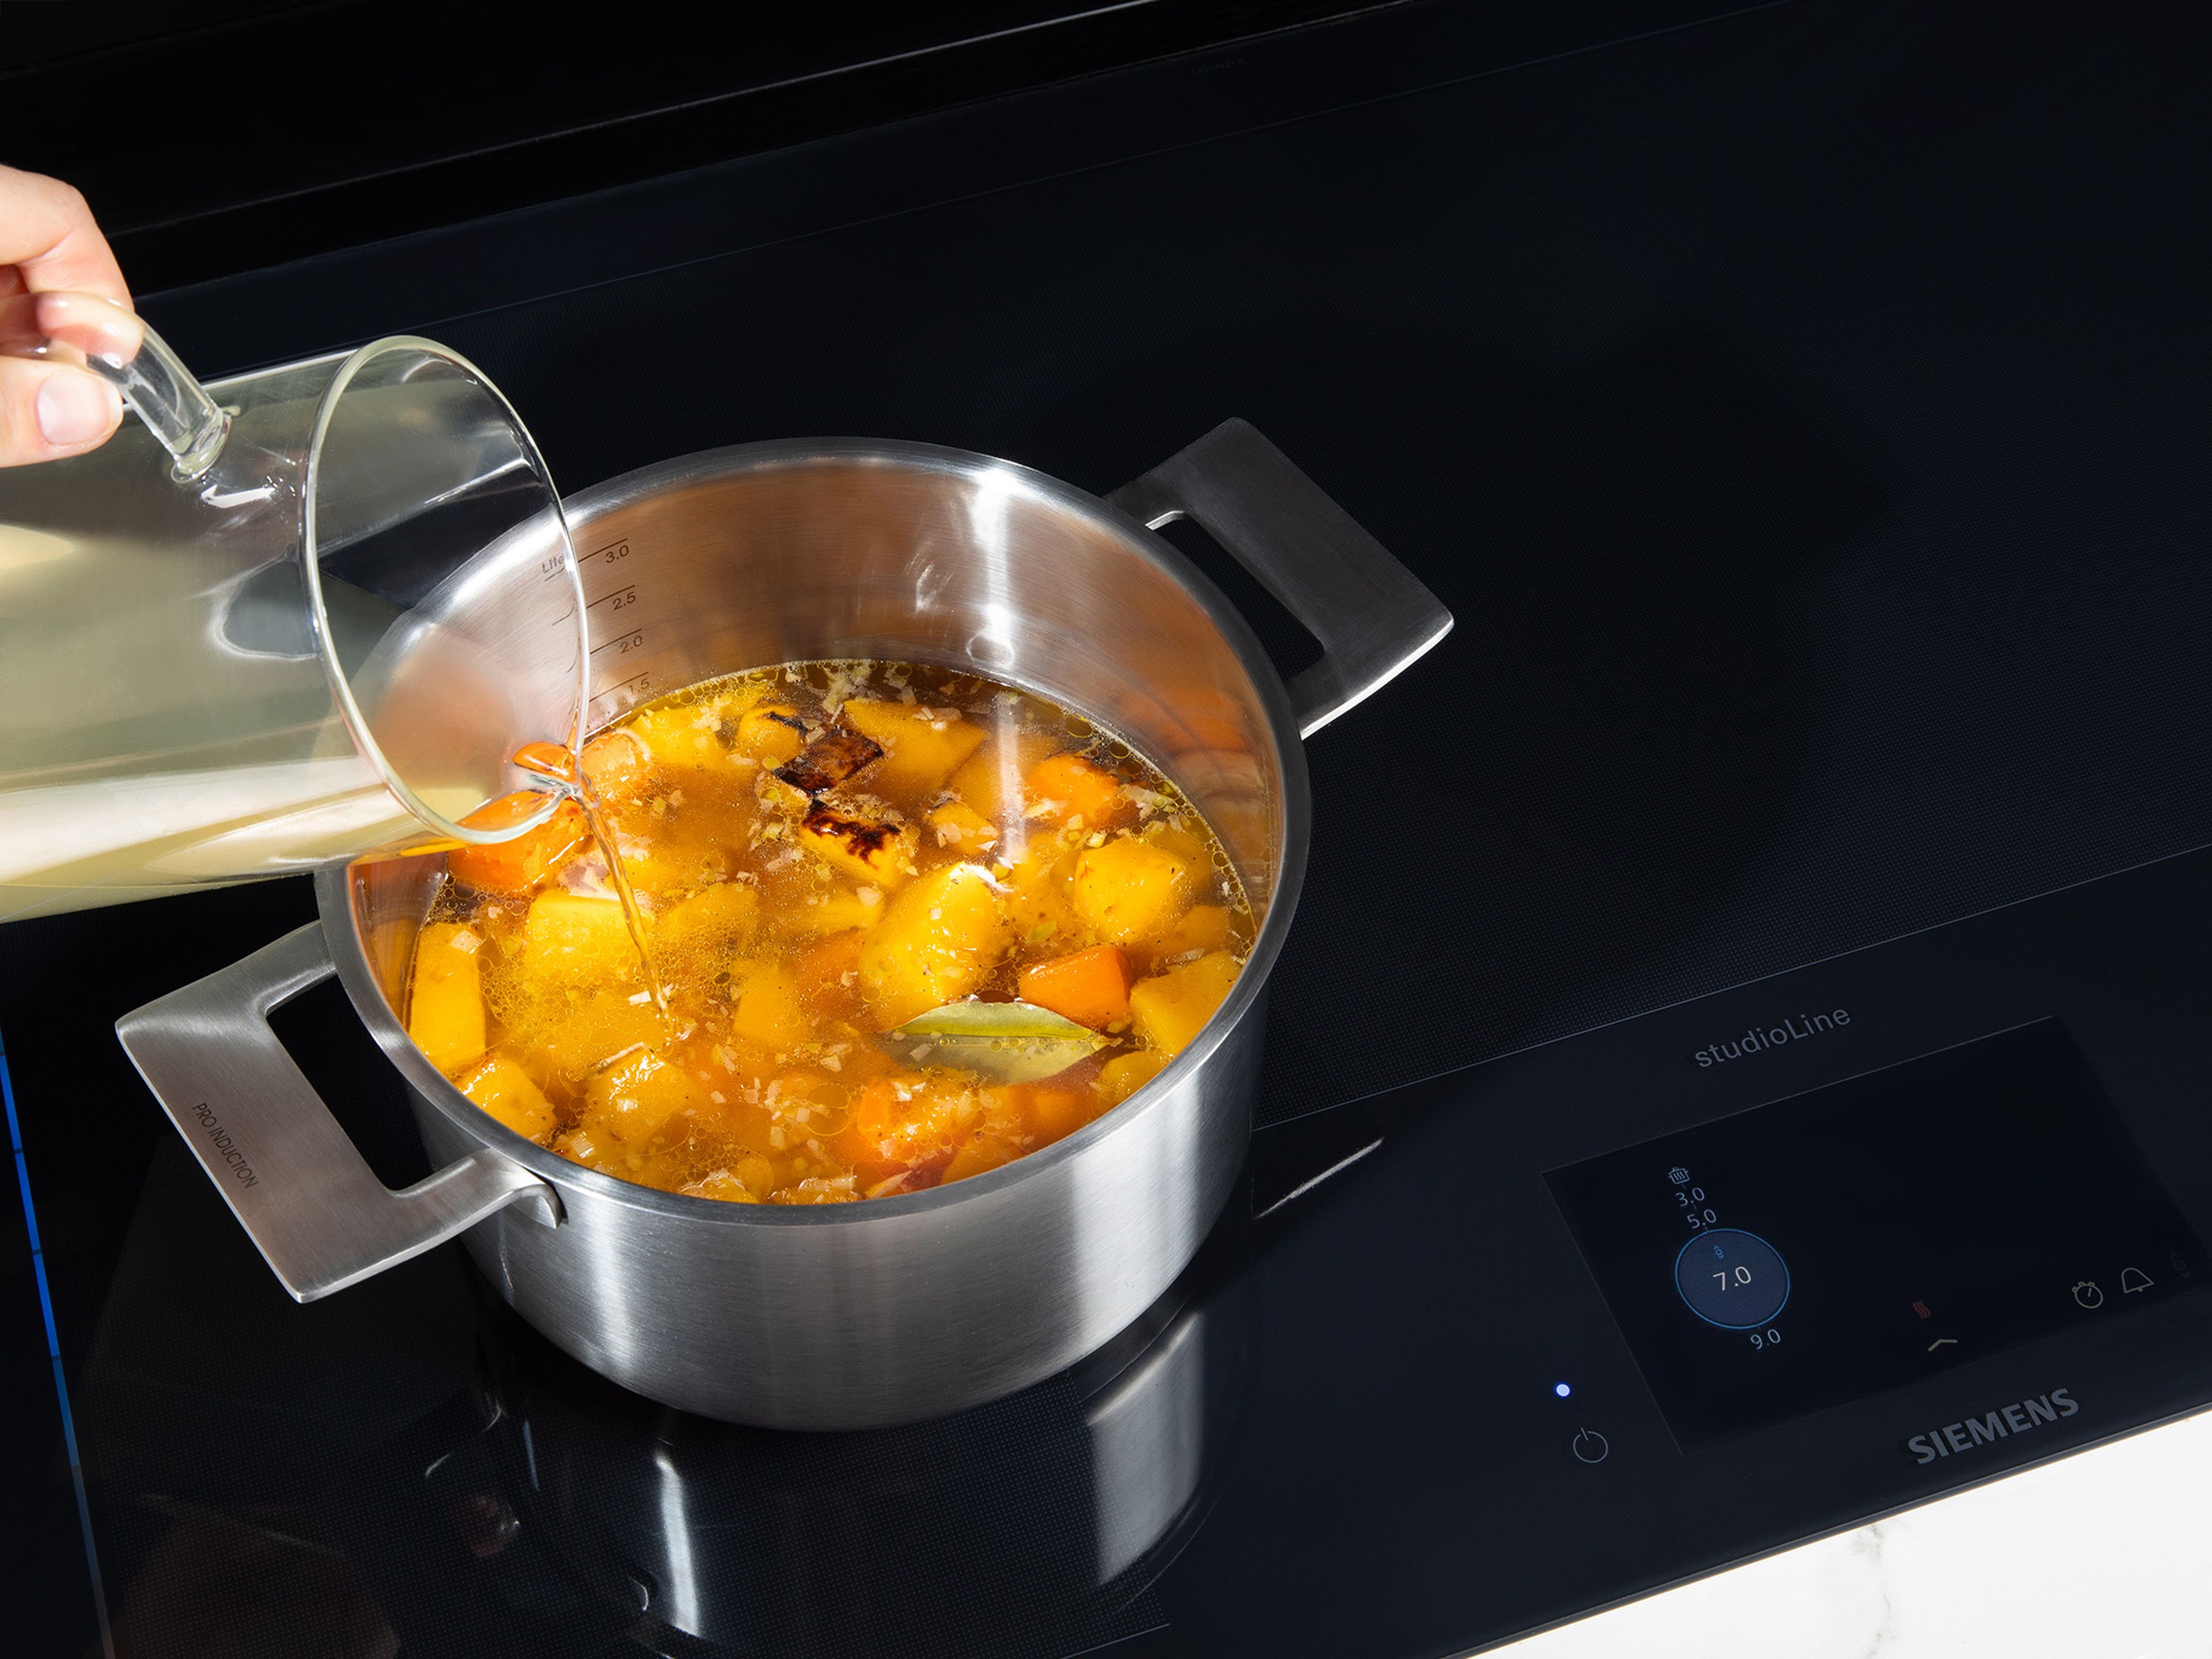 Heat olive oil in a large pot on medium heat and fry the onion for approx. 10 min. until starting to brown. Add garlic, bay leaves, and spices and fry for another minute. Then add the squash, carrots, and vegetable stock, and simmer for approx. 15 min.